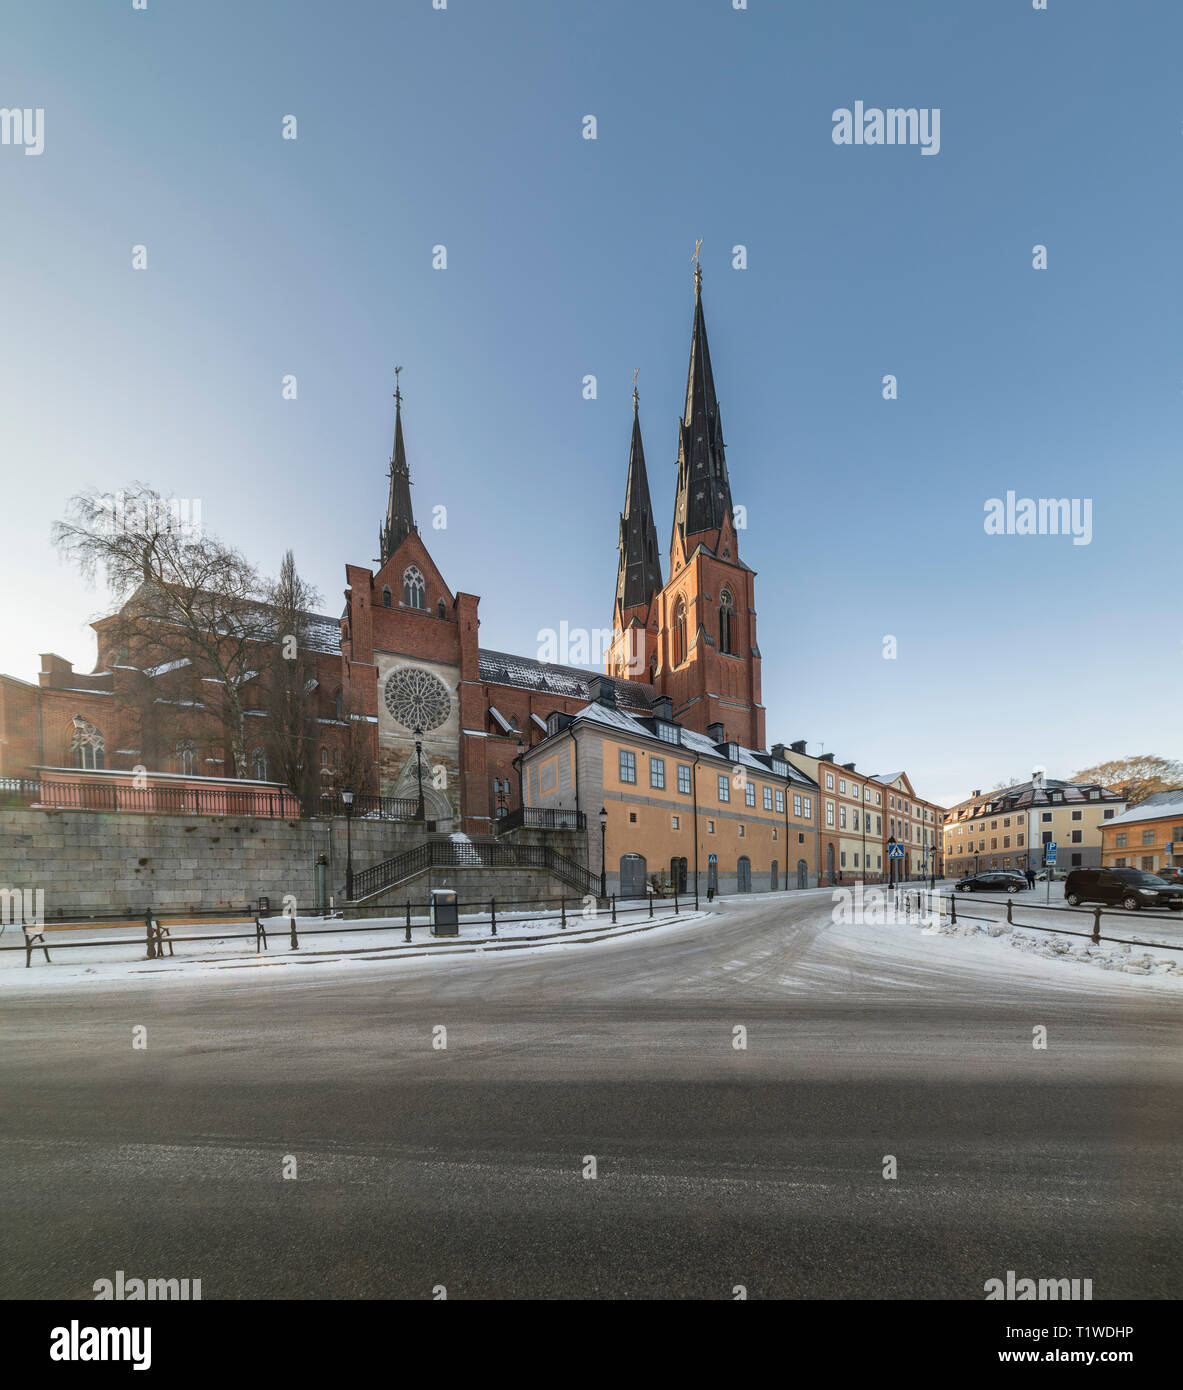 The Sankt Eriks torg square and the Cathedral (Domkyrkan). Uppsala, Sweden, Scandinavia Stock Photo